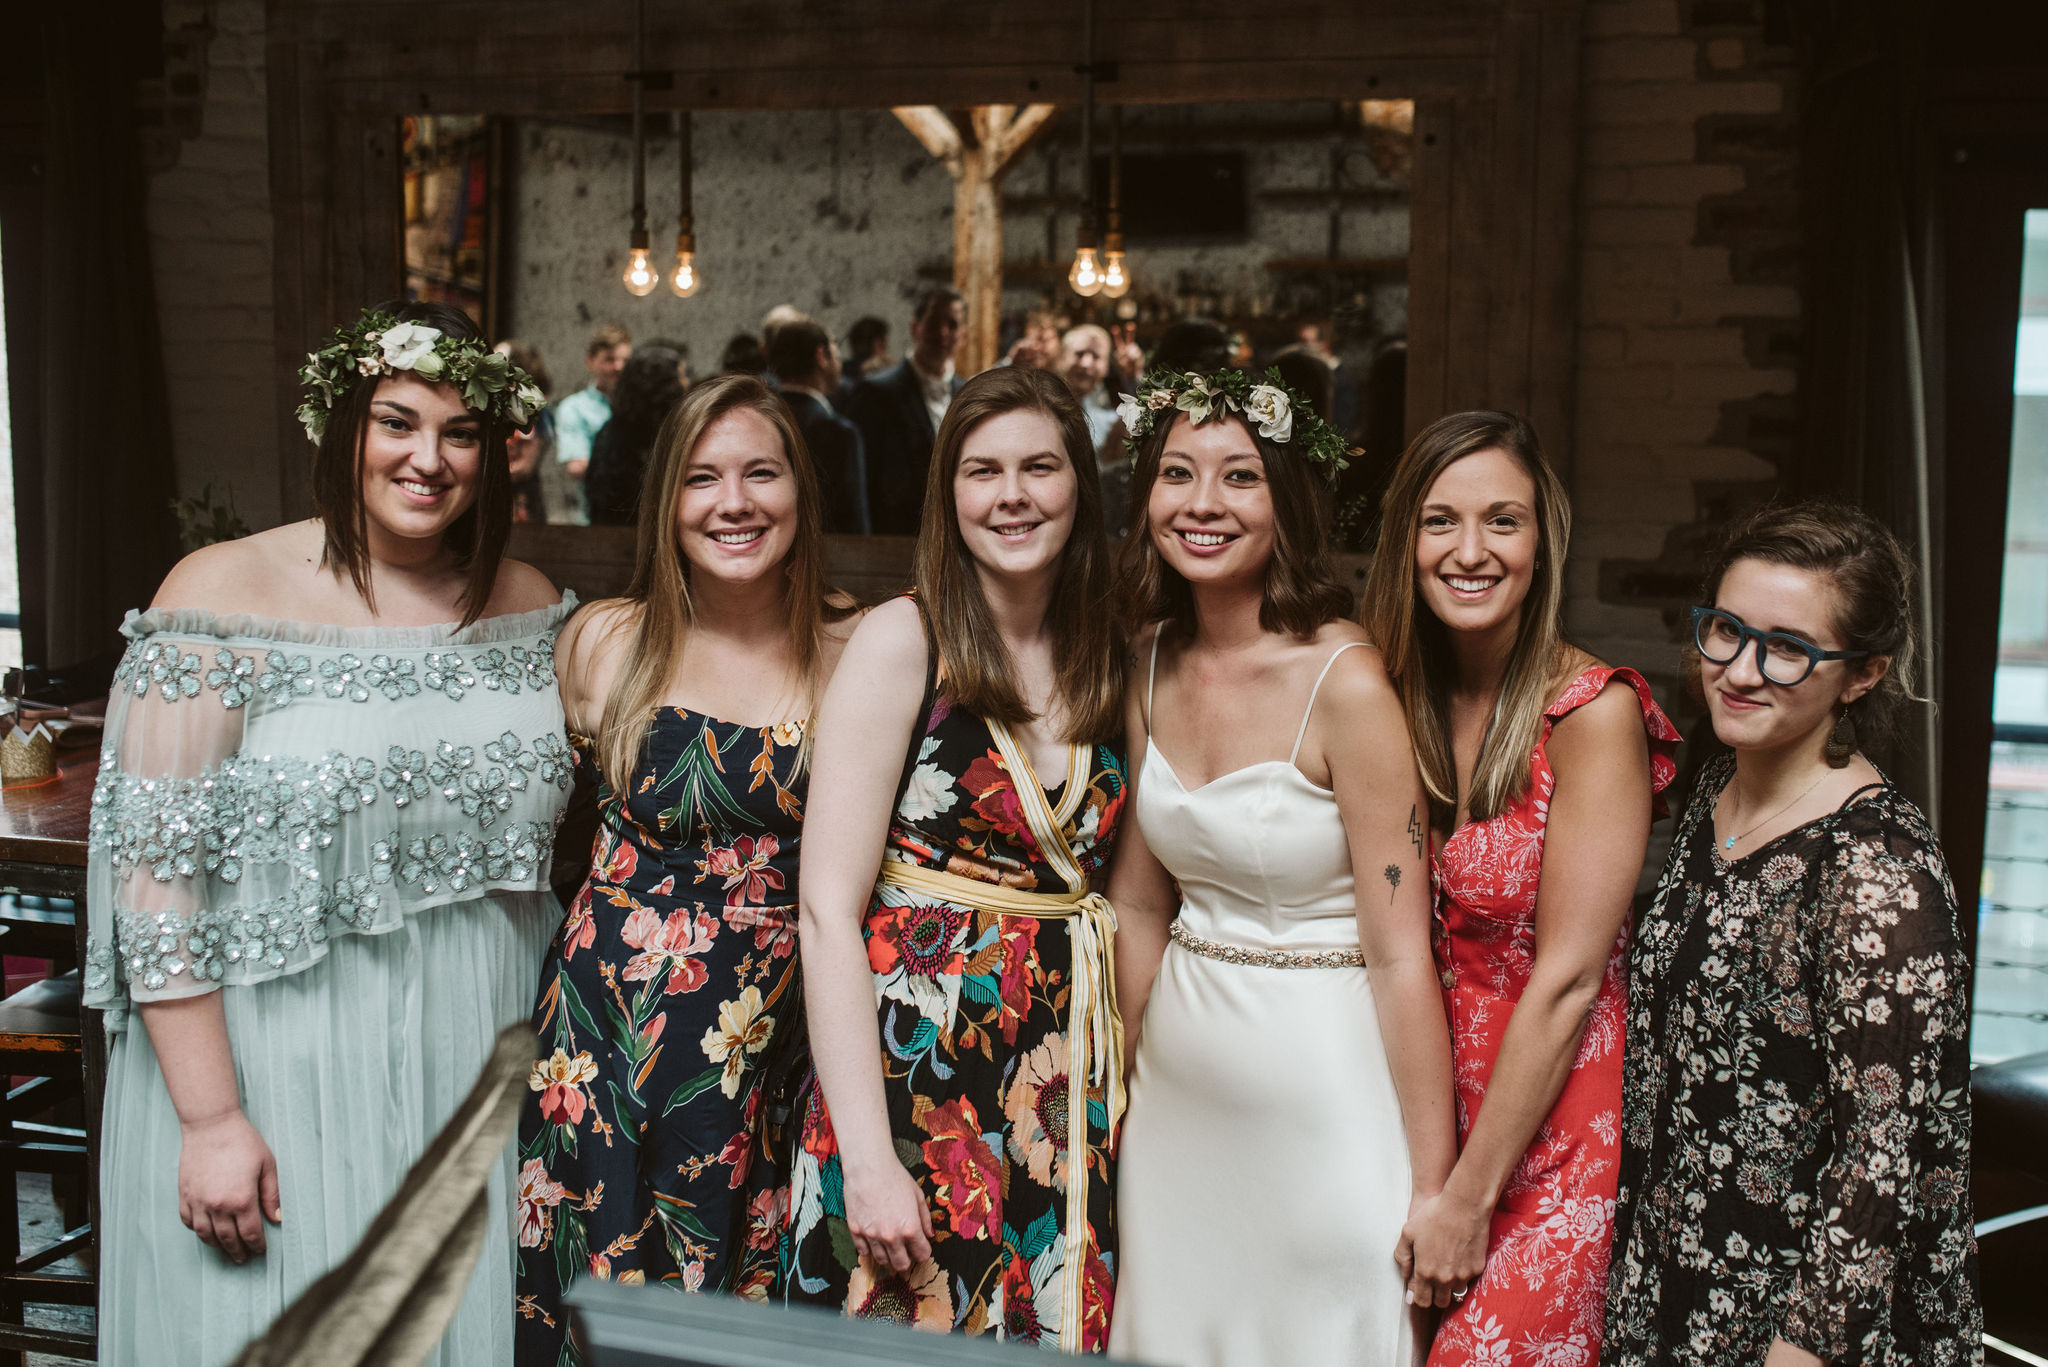  Washington DC, Baltimore Wedding Photographer, Alexandria, Old Town, Jewel Tone, Romantic, Modern, Virtue Feed &amp; Grain, Portrait of Bride with Friends After Ceremony 